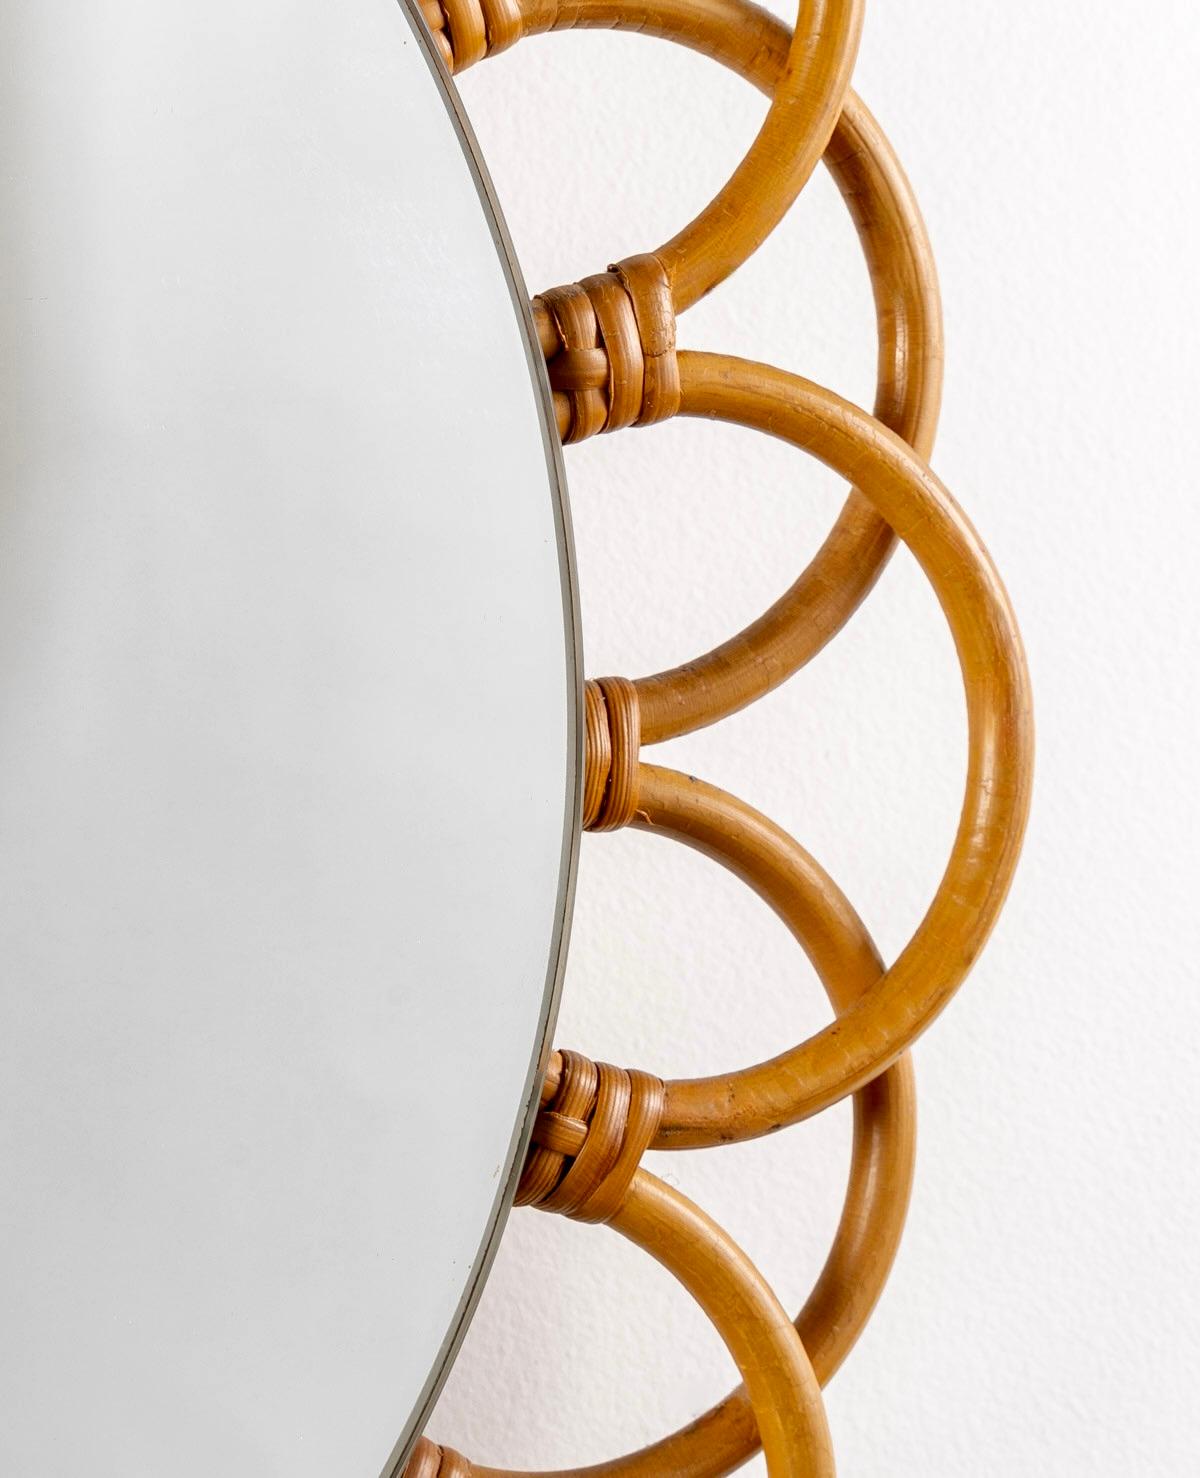 Composed of a circular mirror underlined on the perimeter of rattan stems forming half-circles around the mirror and decorating the mirror nicely.
On the upper part a rattan chain formed by small intertwined loops is joined on the upper part by a